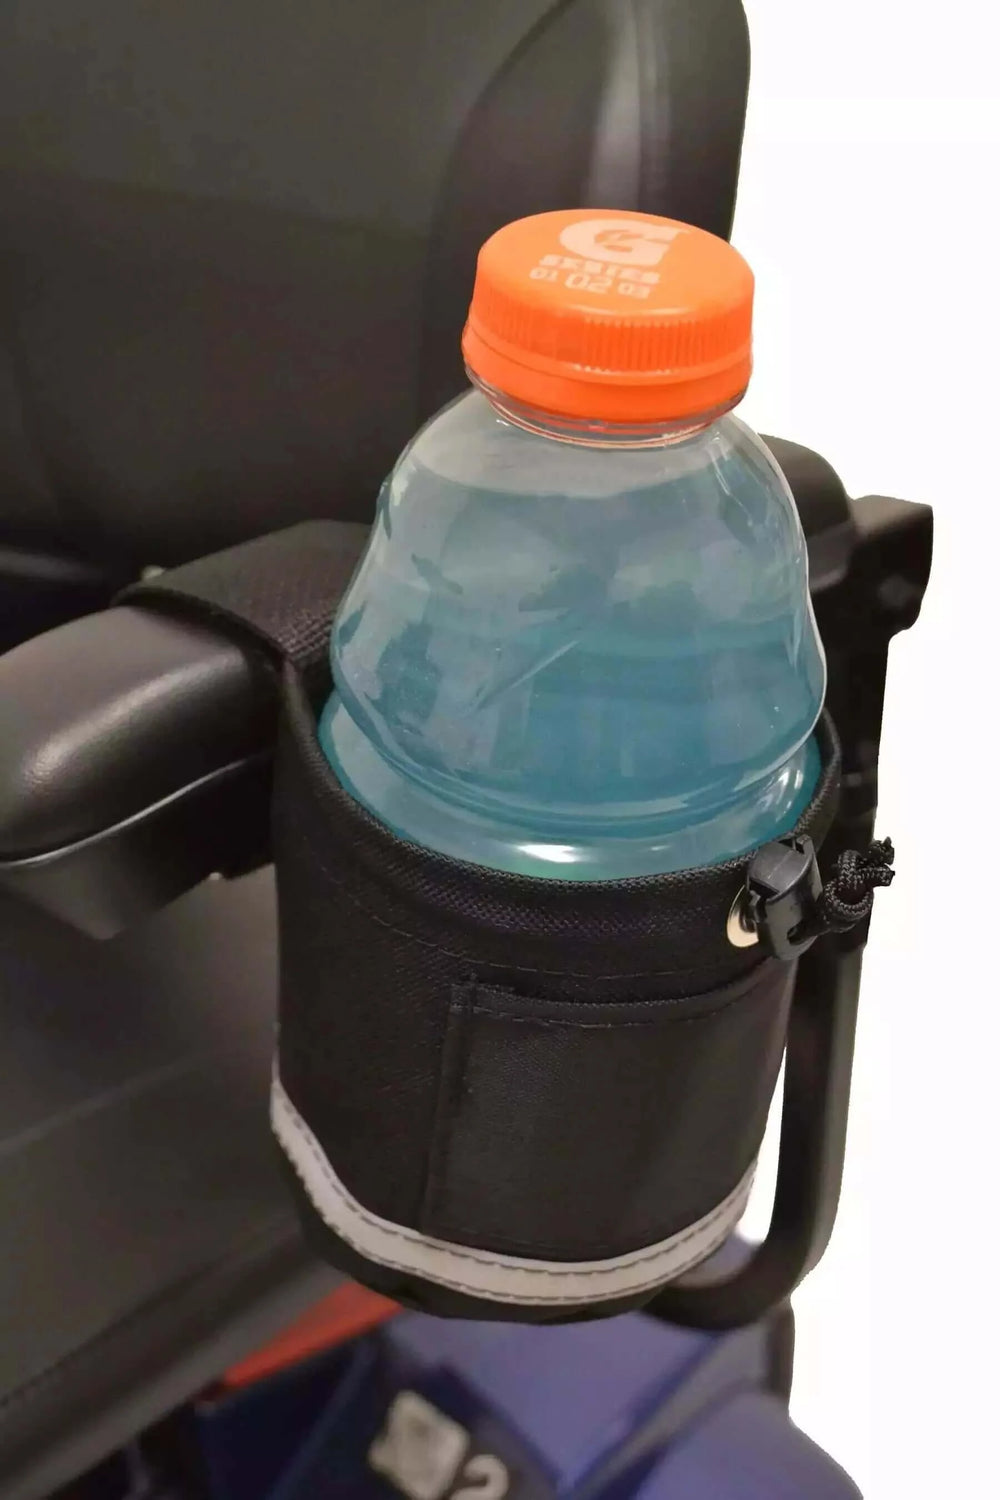 Diestco - Unbreakable Cup Holder for Mobility Aids - Horizontal Grip with white background